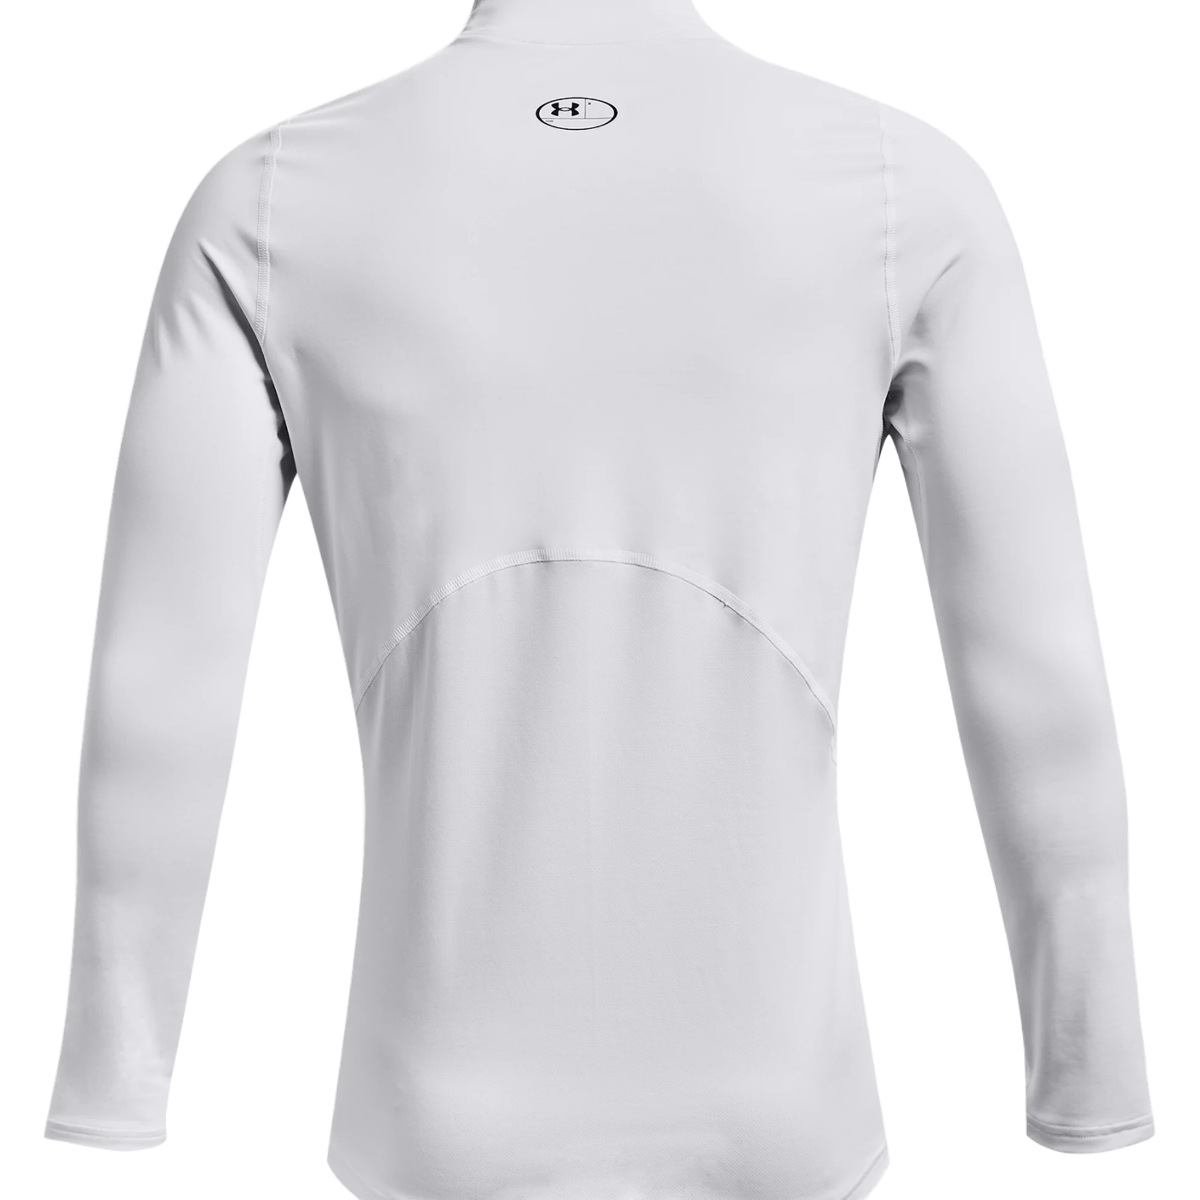 Under Armour ColdGear Fitted Mock Neck Long Sleeve Shirt - Men's 